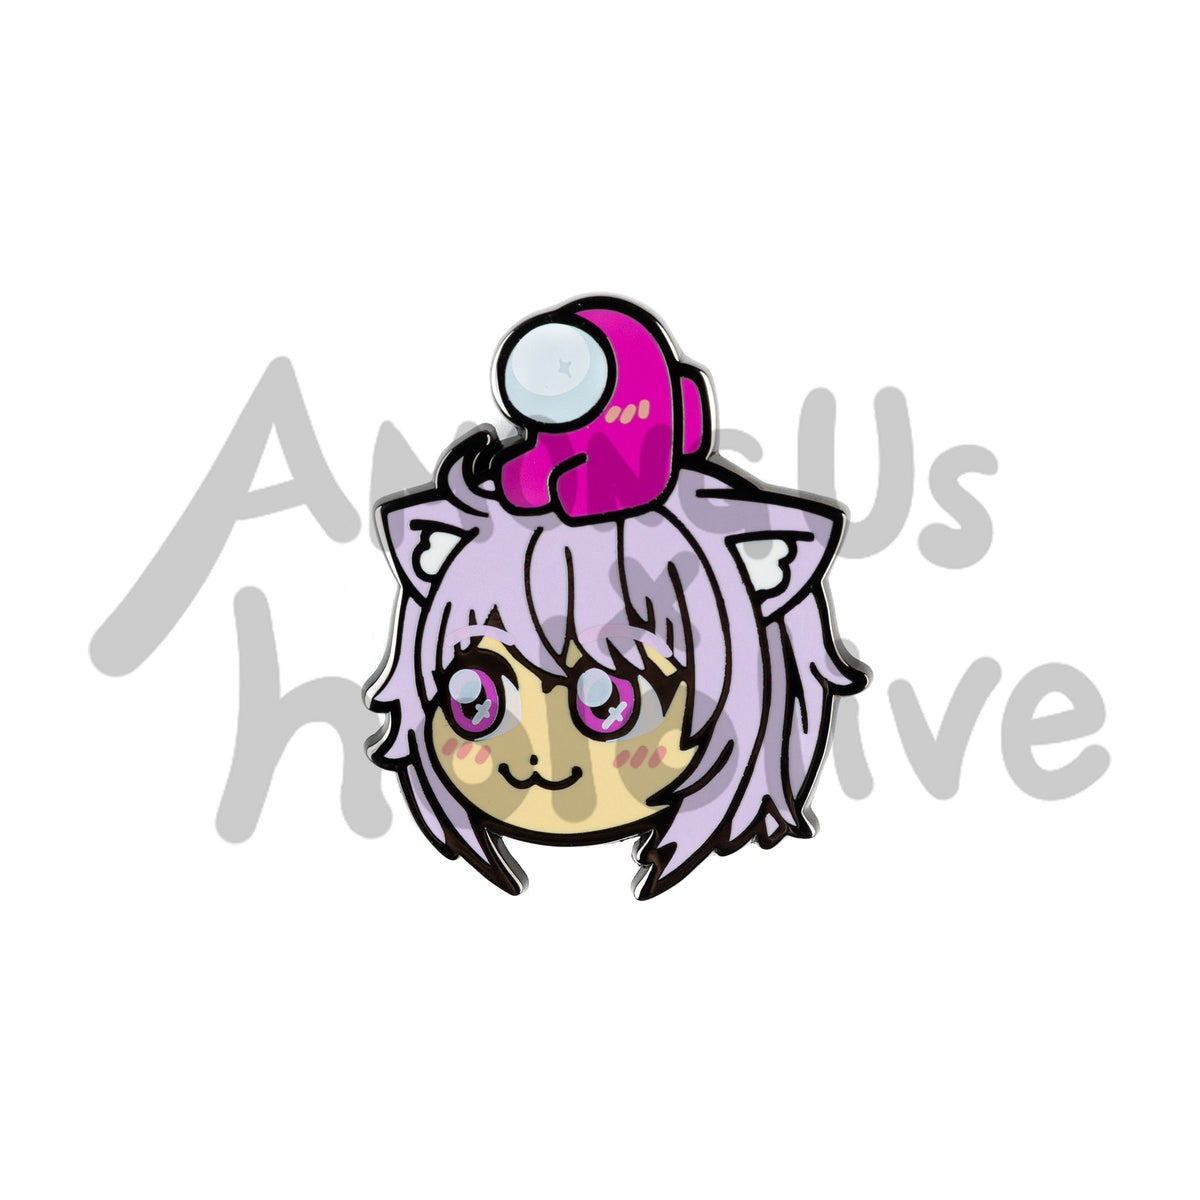 Enamel Pin of Nekomata Okayu&#39;s Face from Hololive. Okayu has fair skin, magenta sparkly eyes, and pastel purple bobbed hair with matching purple cat ears. There&#39;s a Pink Crewmate sitting atop her head. Both characters have pink blush marks on their faces.